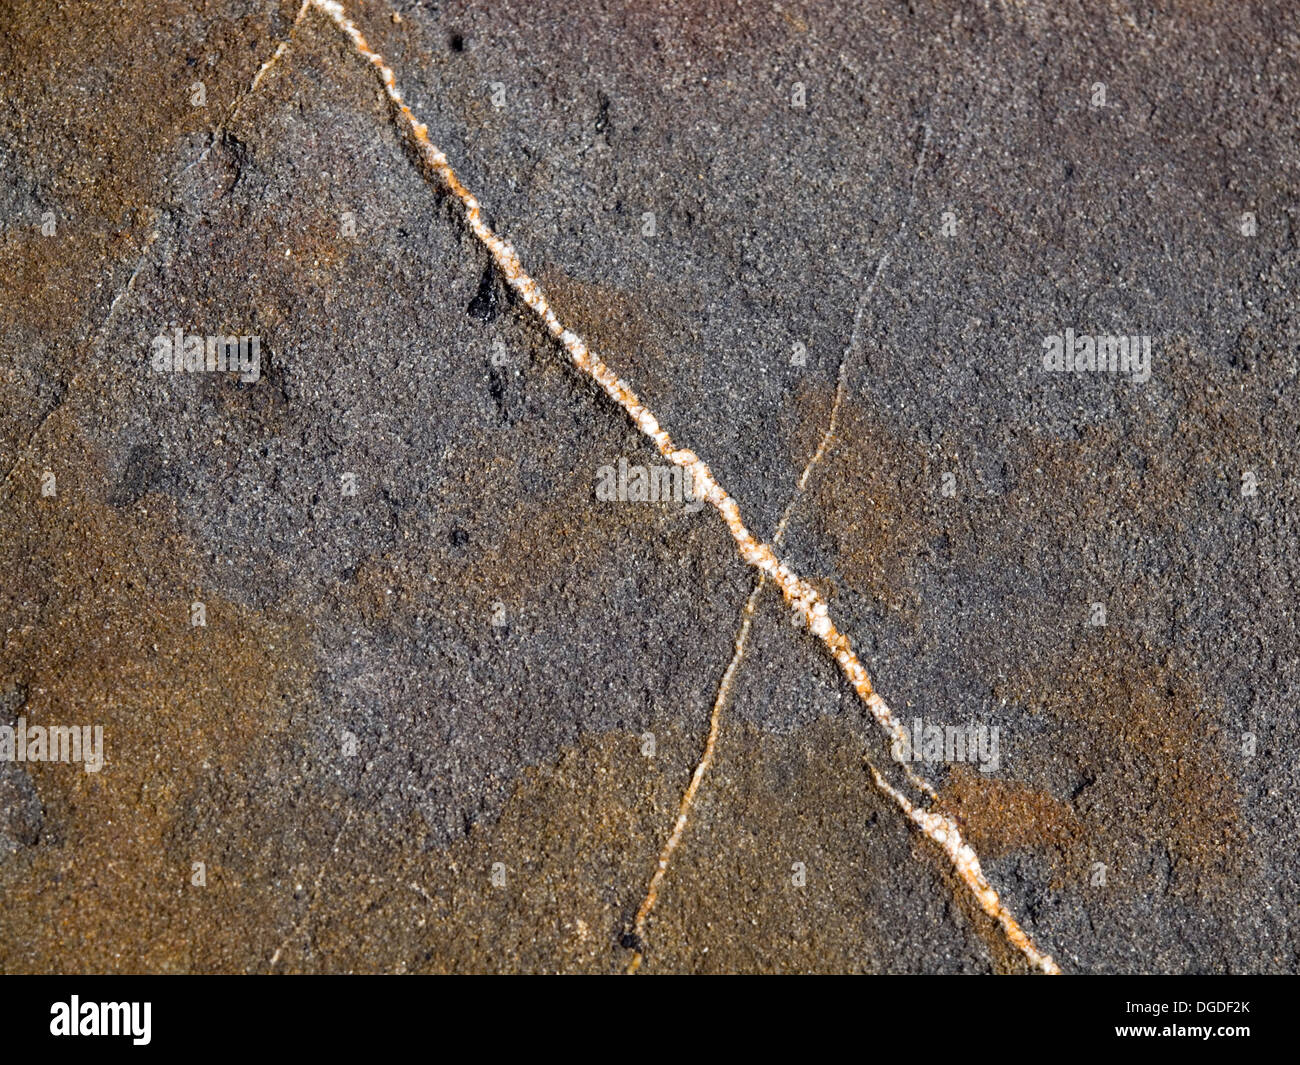 abstract rock pattern background Stock Photo